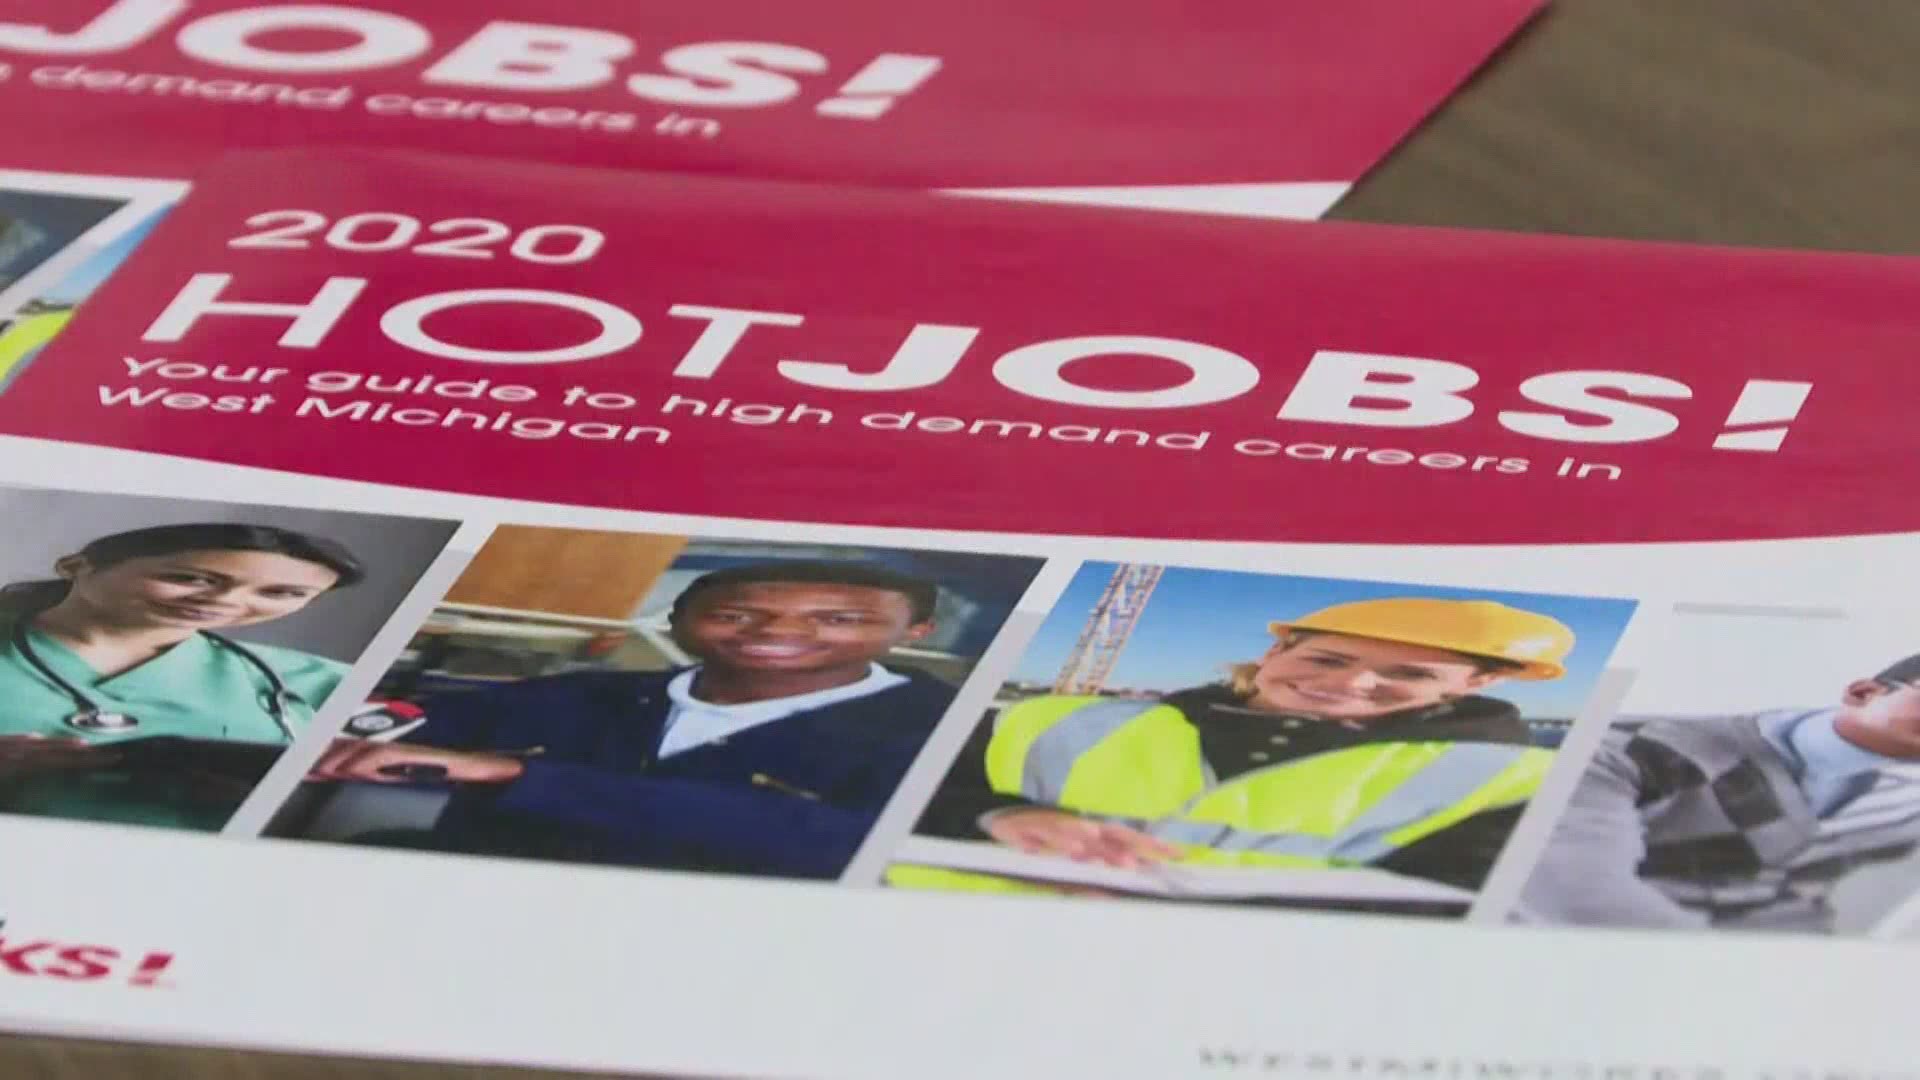 West Michigan Works is holding a virtual job fair Wednesday, Sept. 16 starting at 9 a.m.